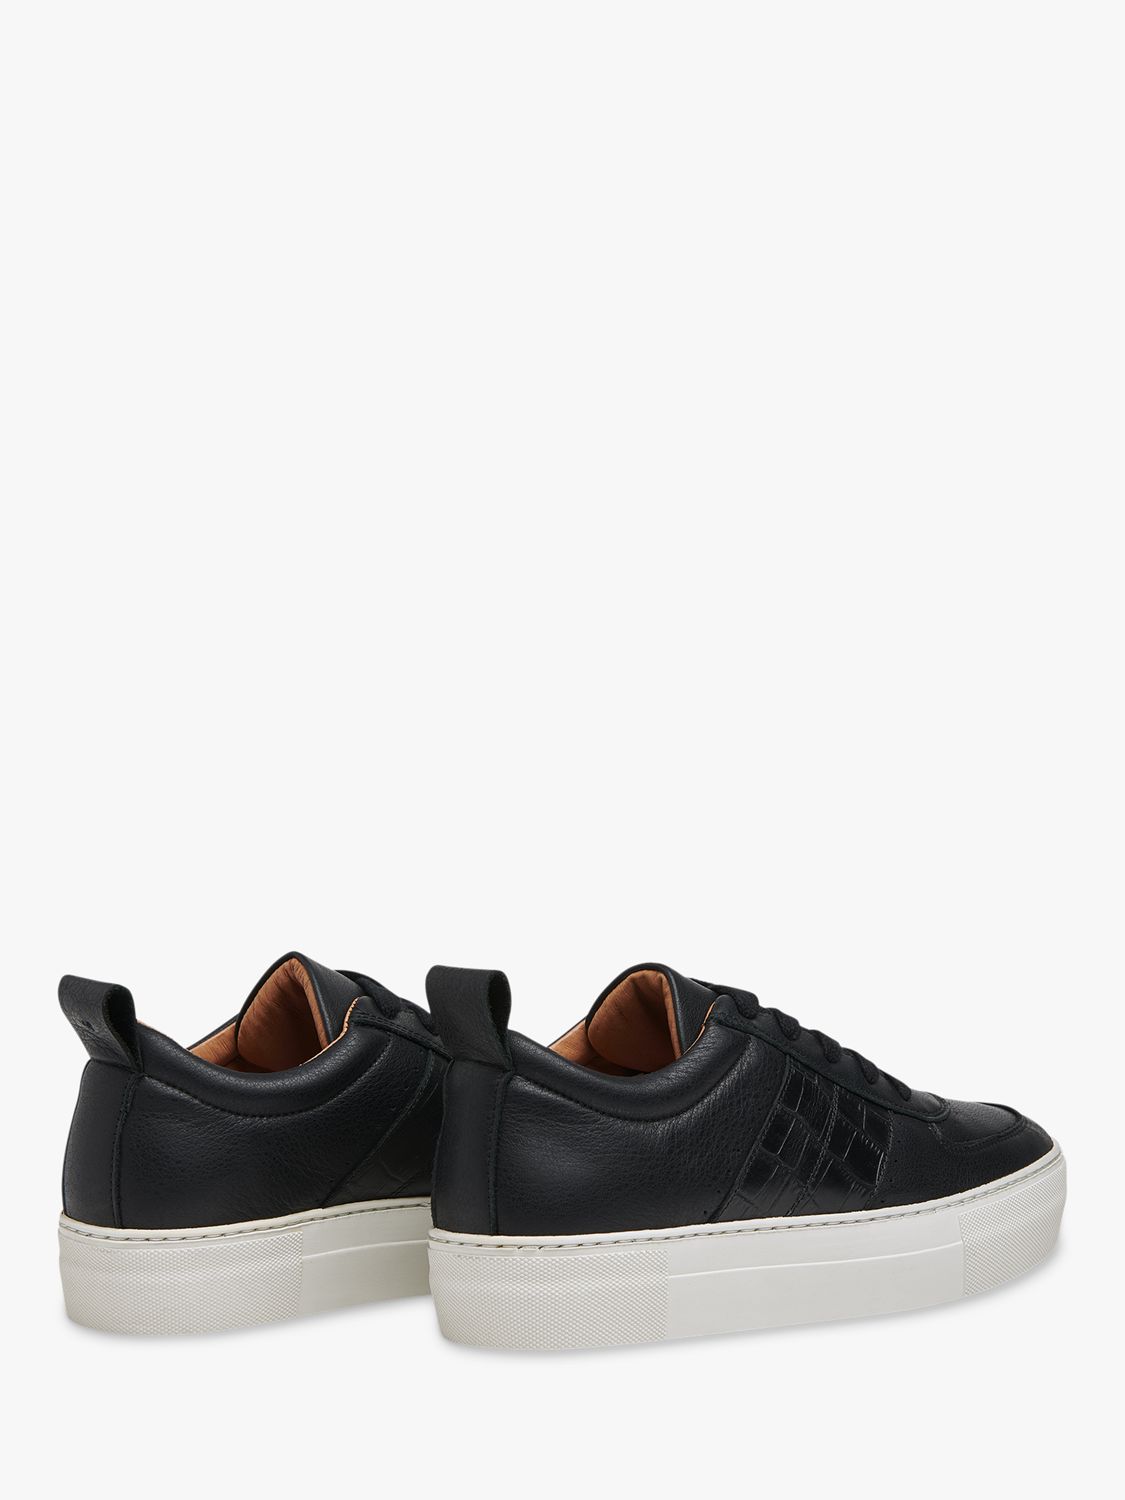 Whistles Anna Deep Sole Trainers, Black Leather at John Lewis & Partners